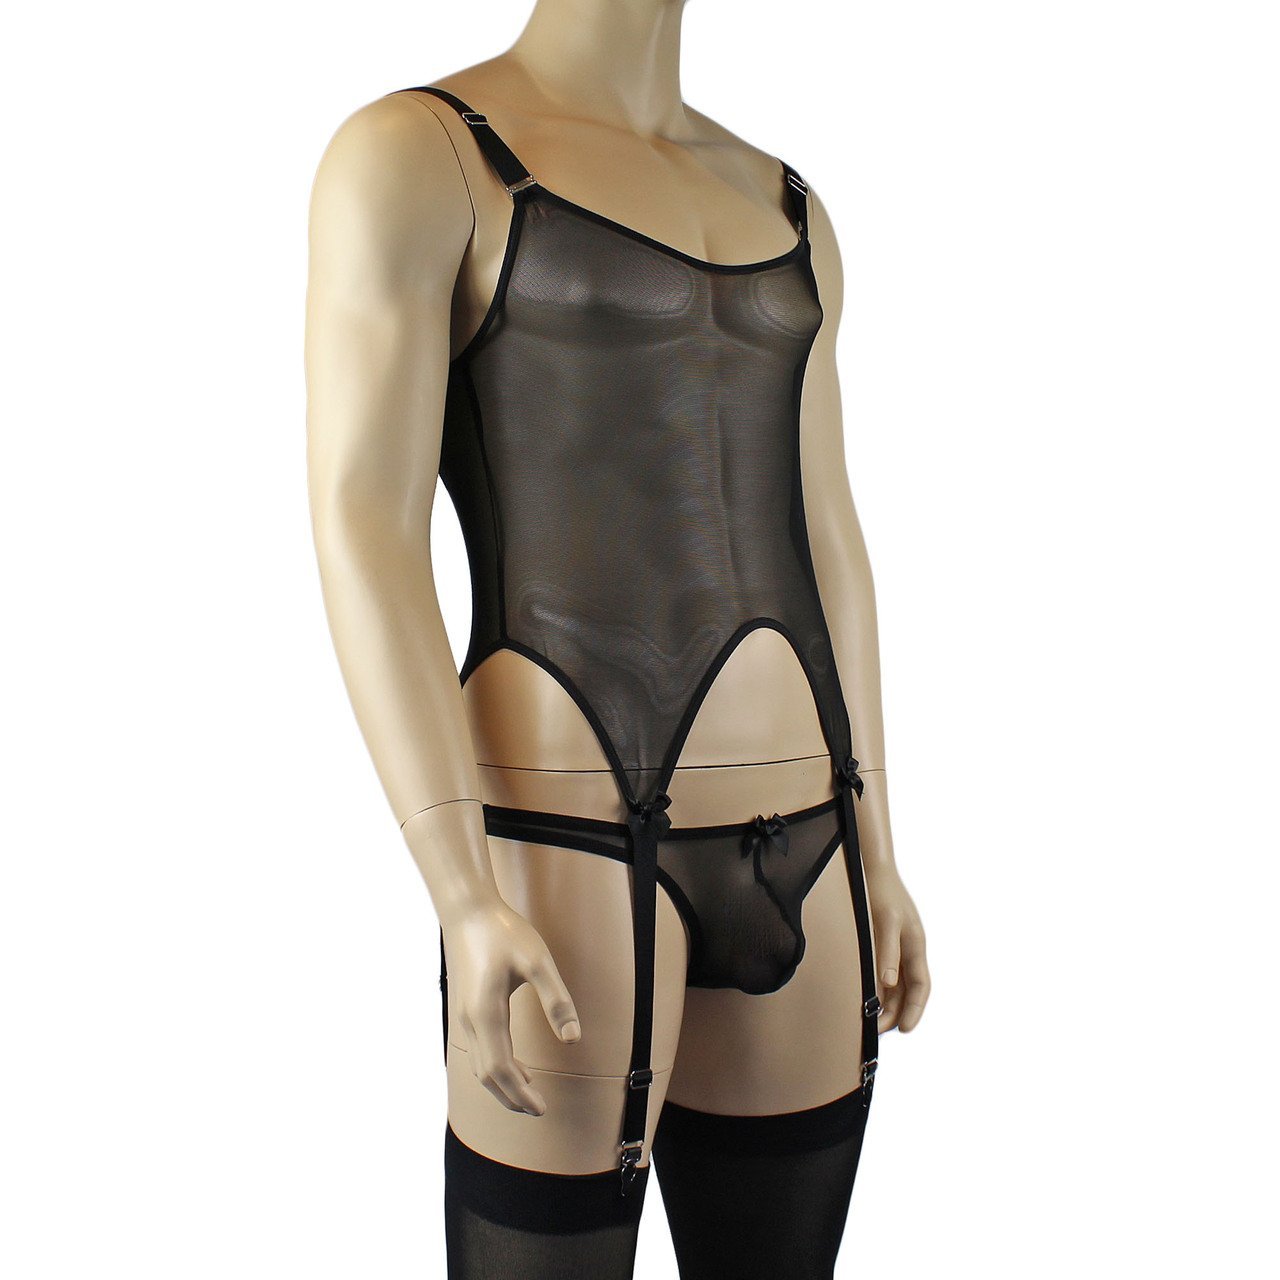 Mens Exotic Corset Top, Thong & Stockings - Sizes up to 3XL (black plus other colours)